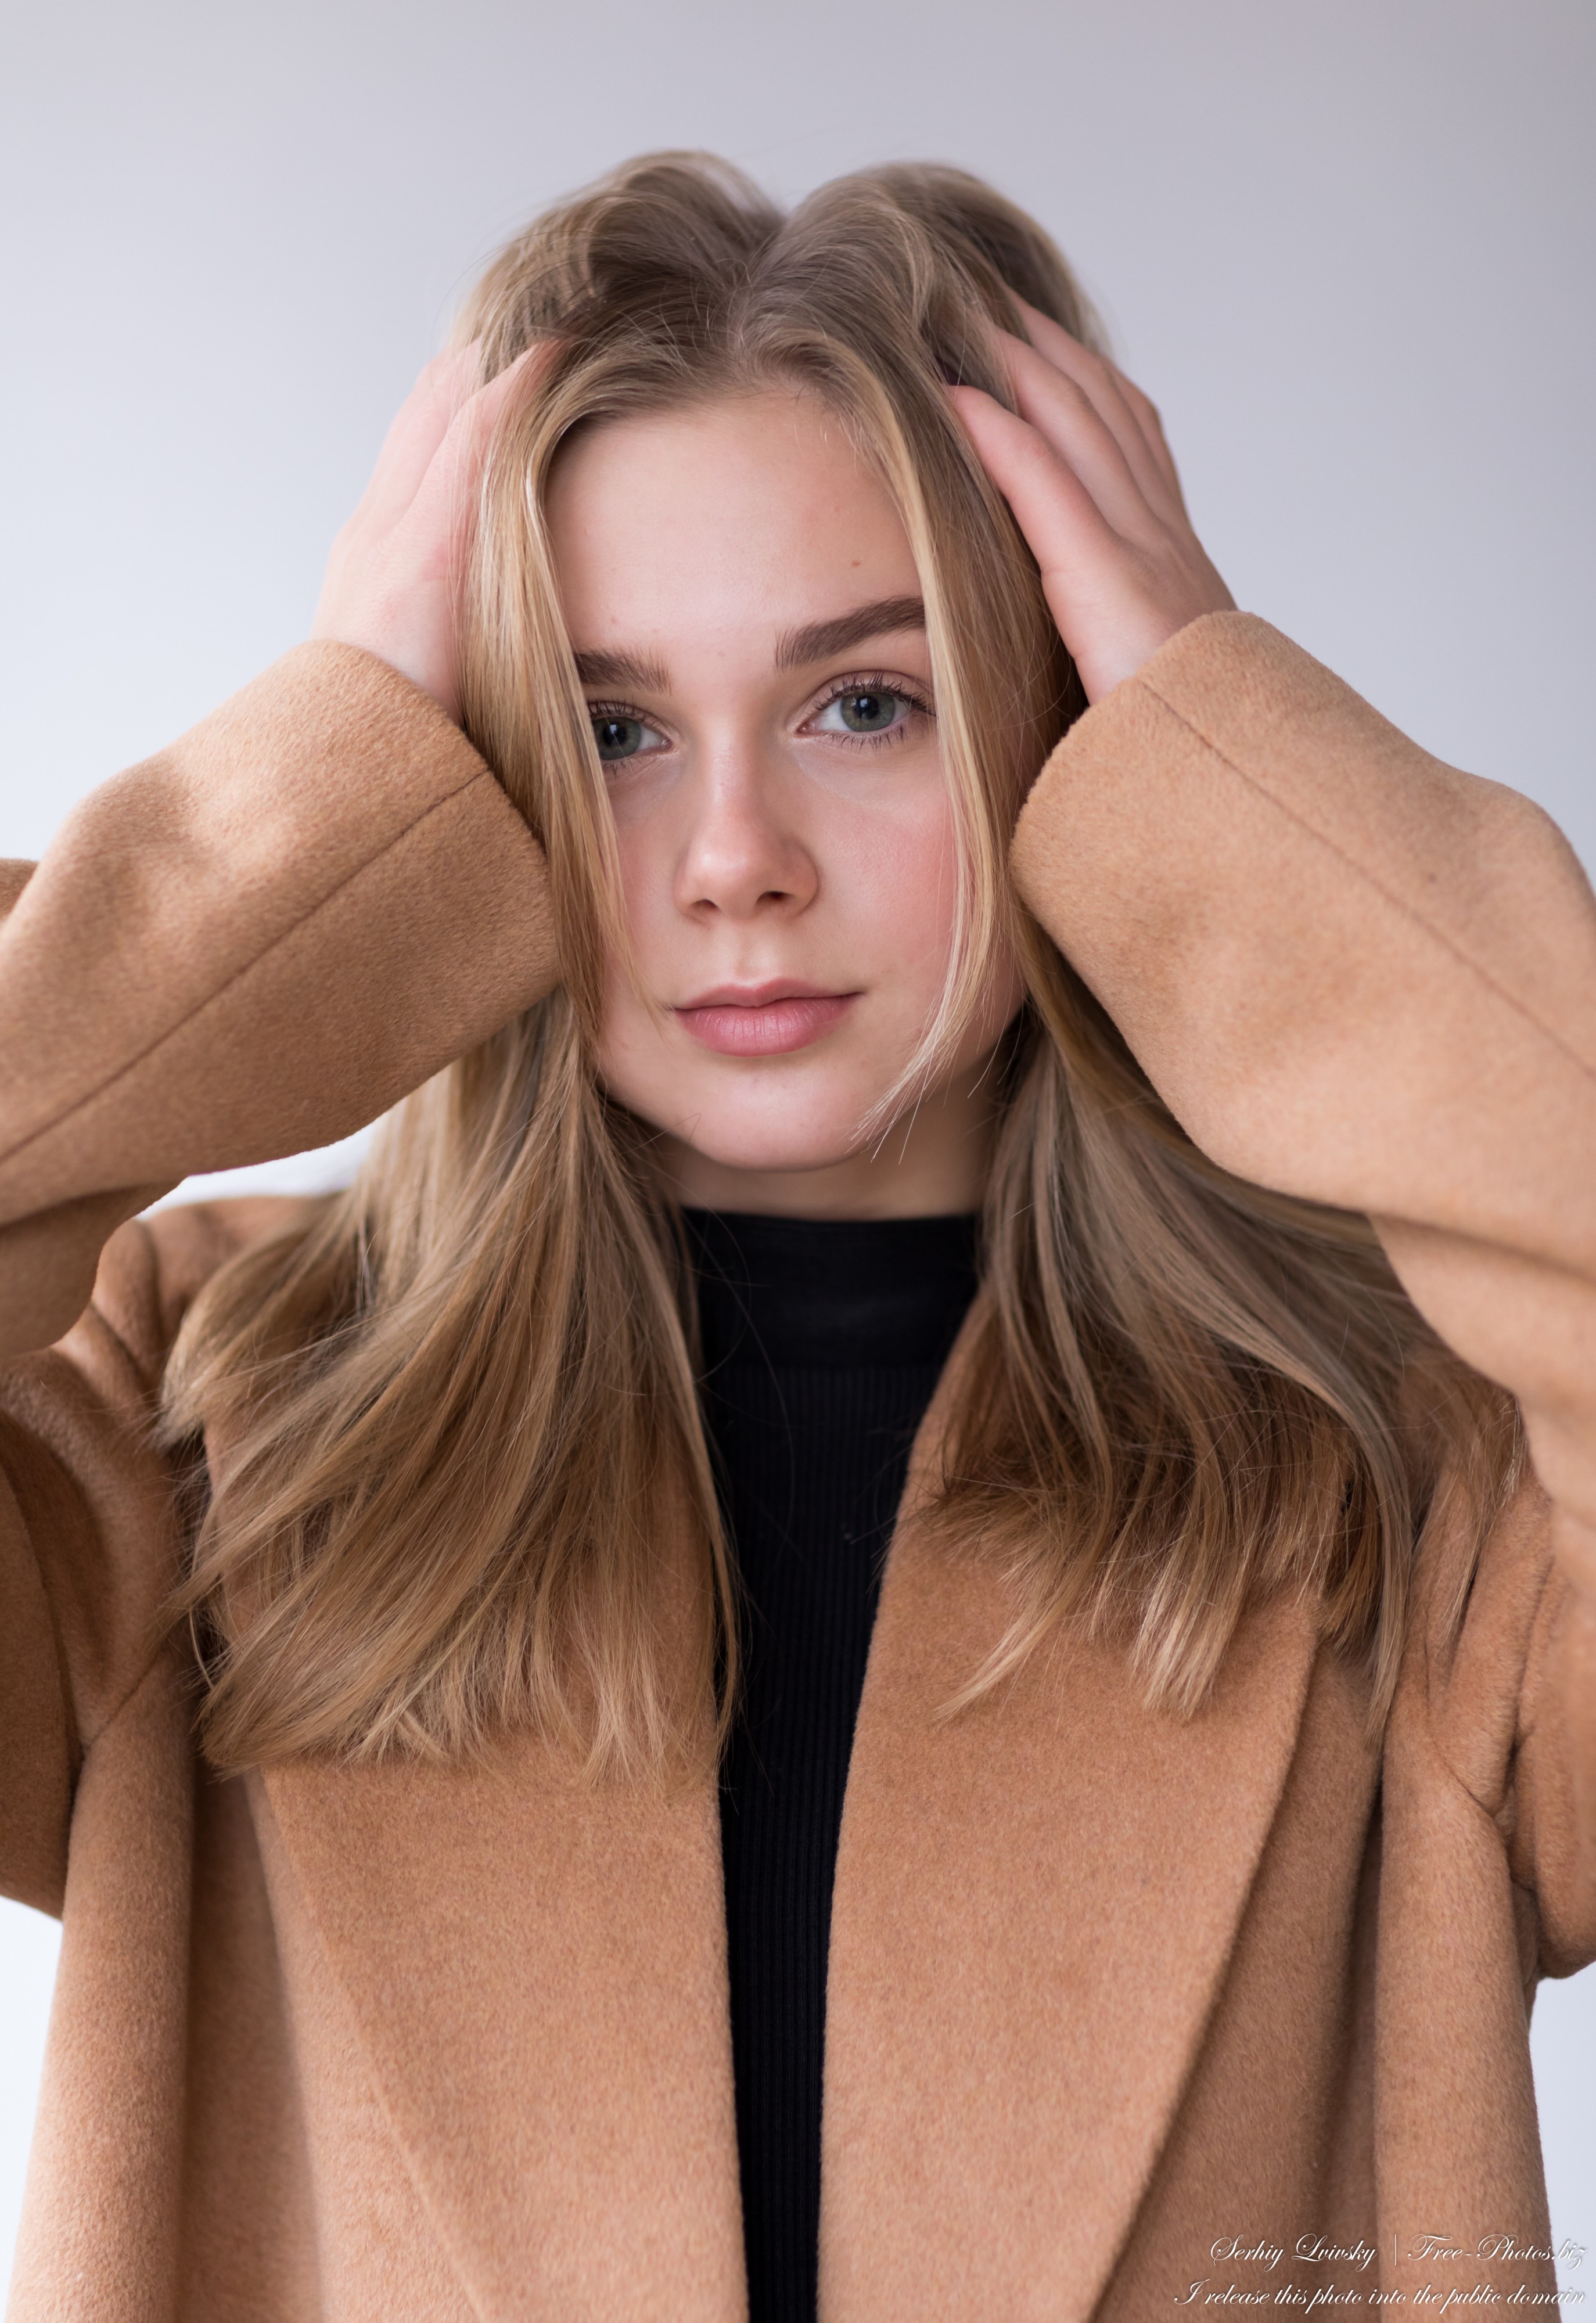 Emilia - a 15-year-old natural blonde Catholic girl photographed in November 2020 by Serhiy Lvivsky, picture 2